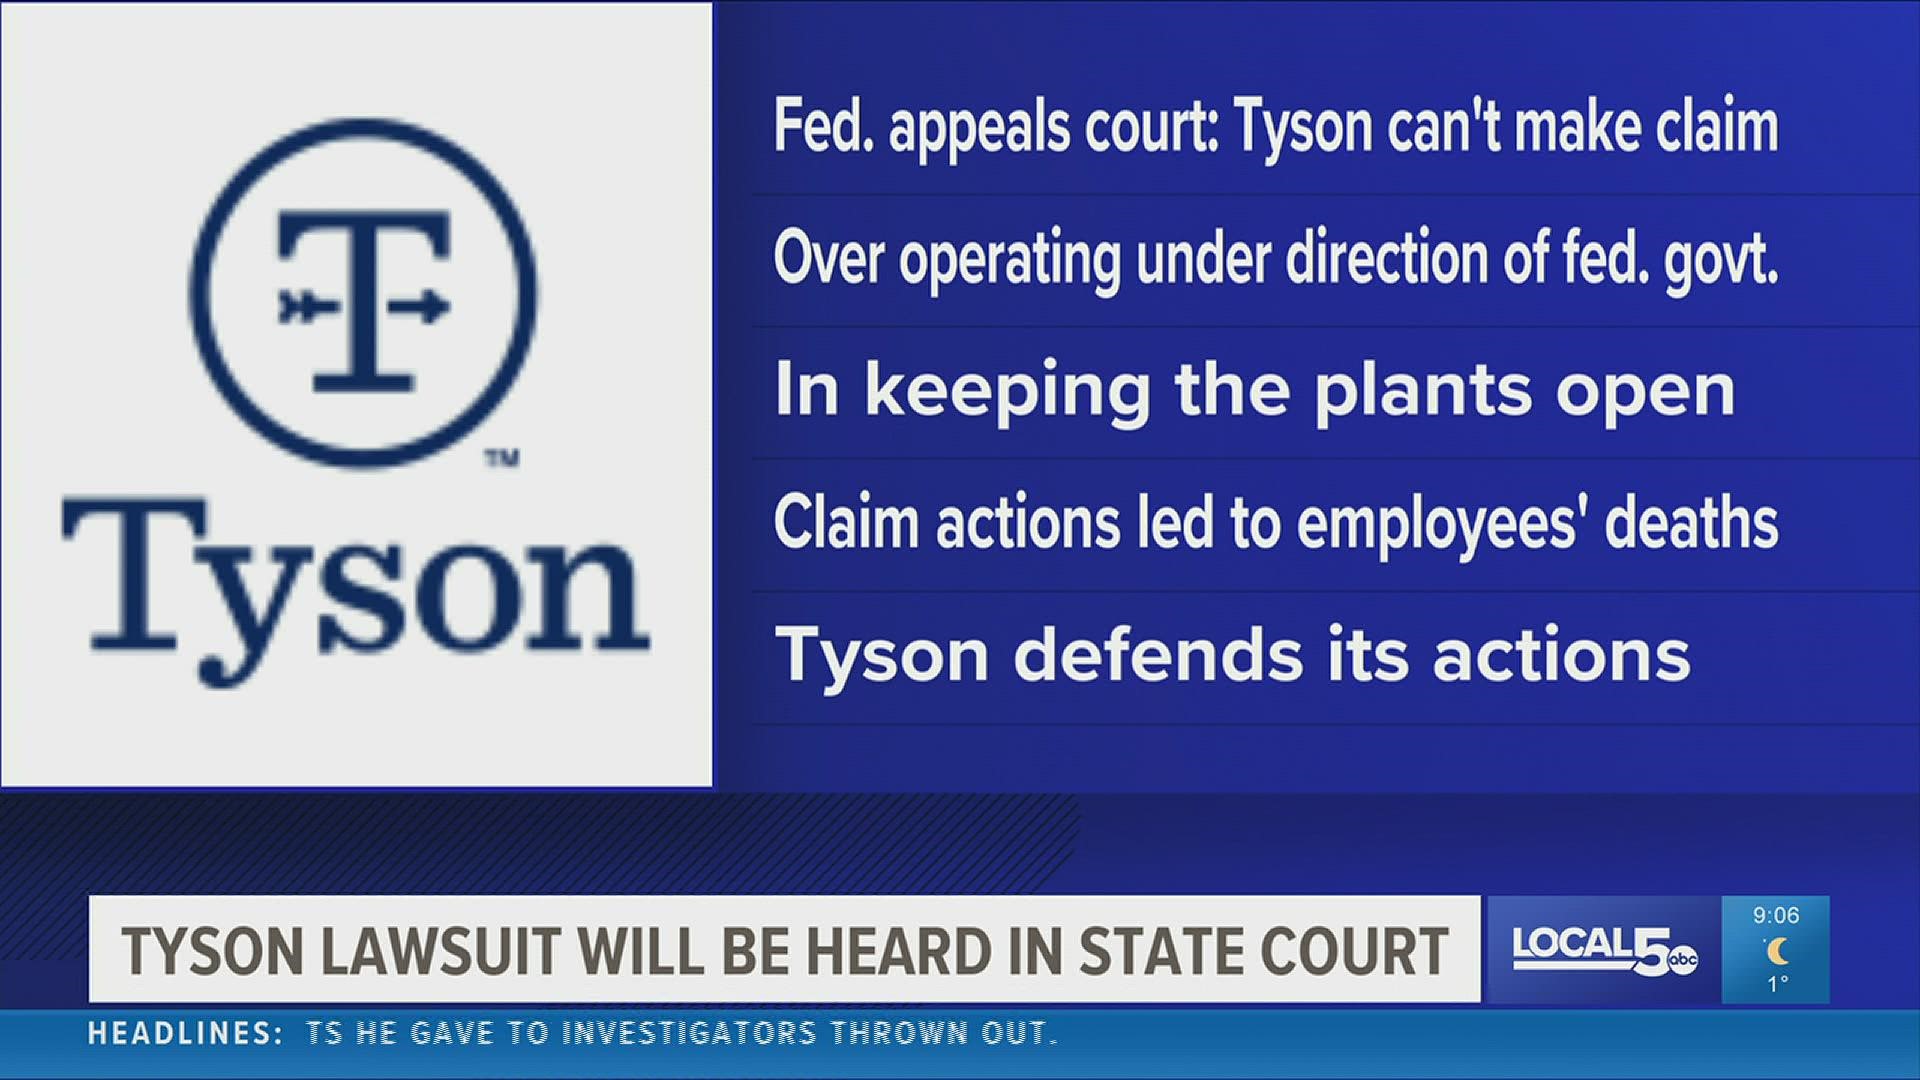 A federal appeals court ruled Tyson Foods wasn't acting under the direction the federal government, sending the case back to state court.